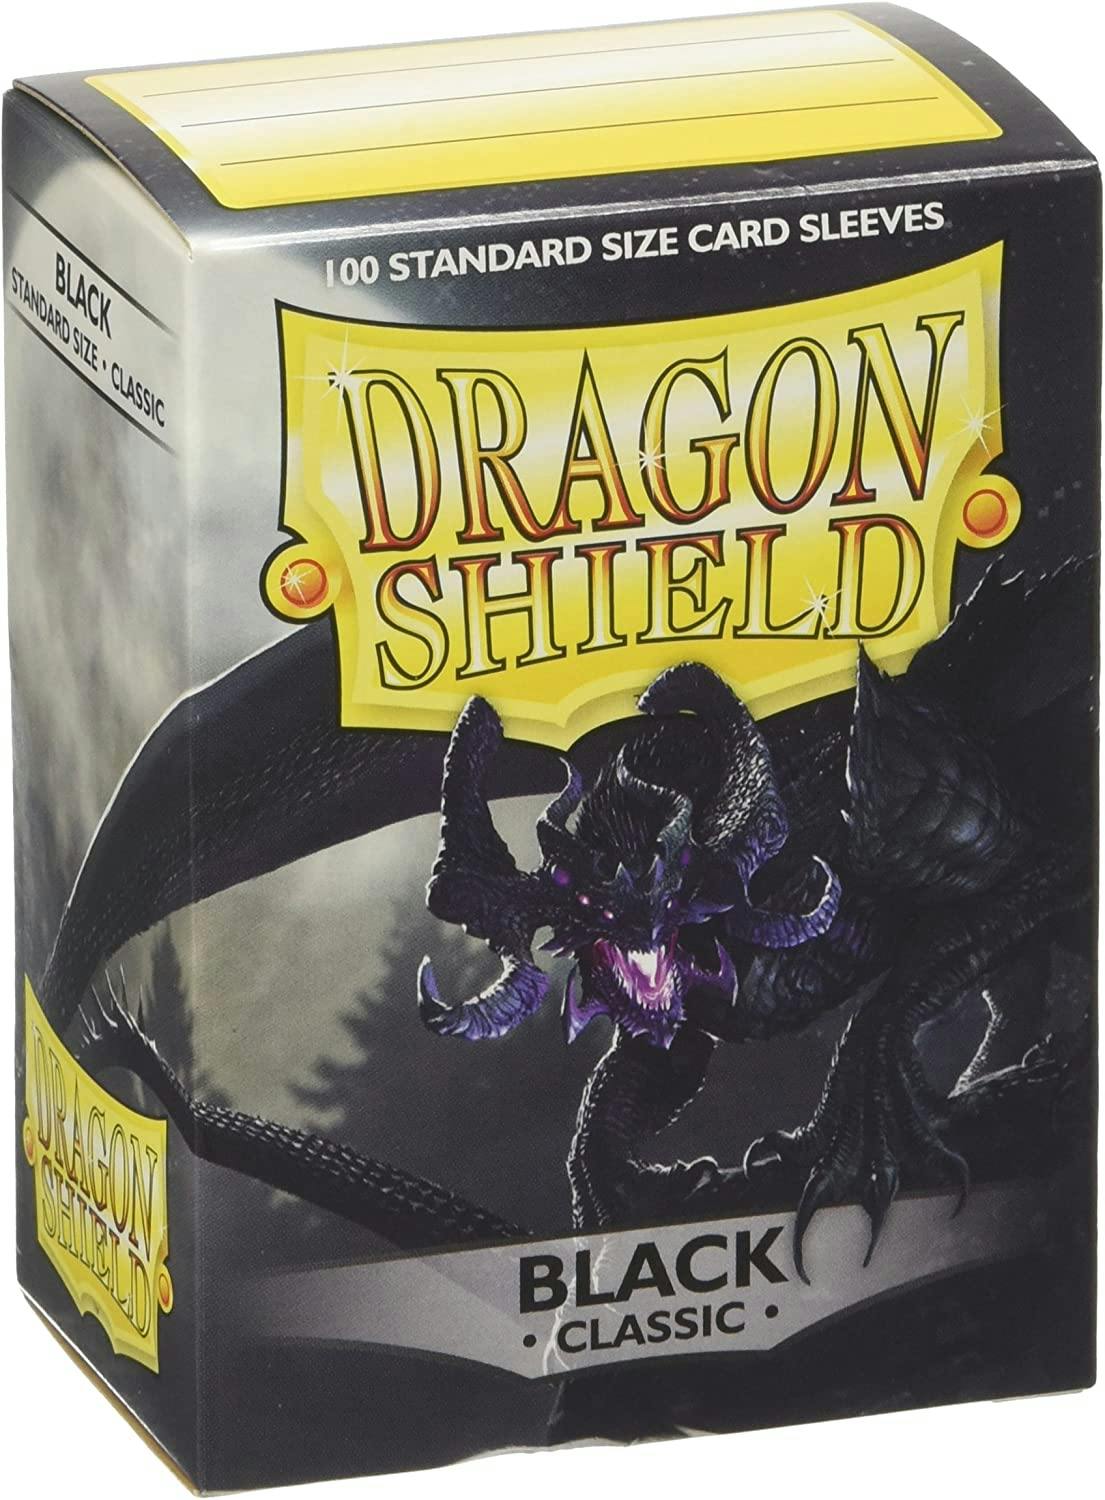 Dragon Shield: Standard Size - Classic Black 100 CTS CARD SLEEVES